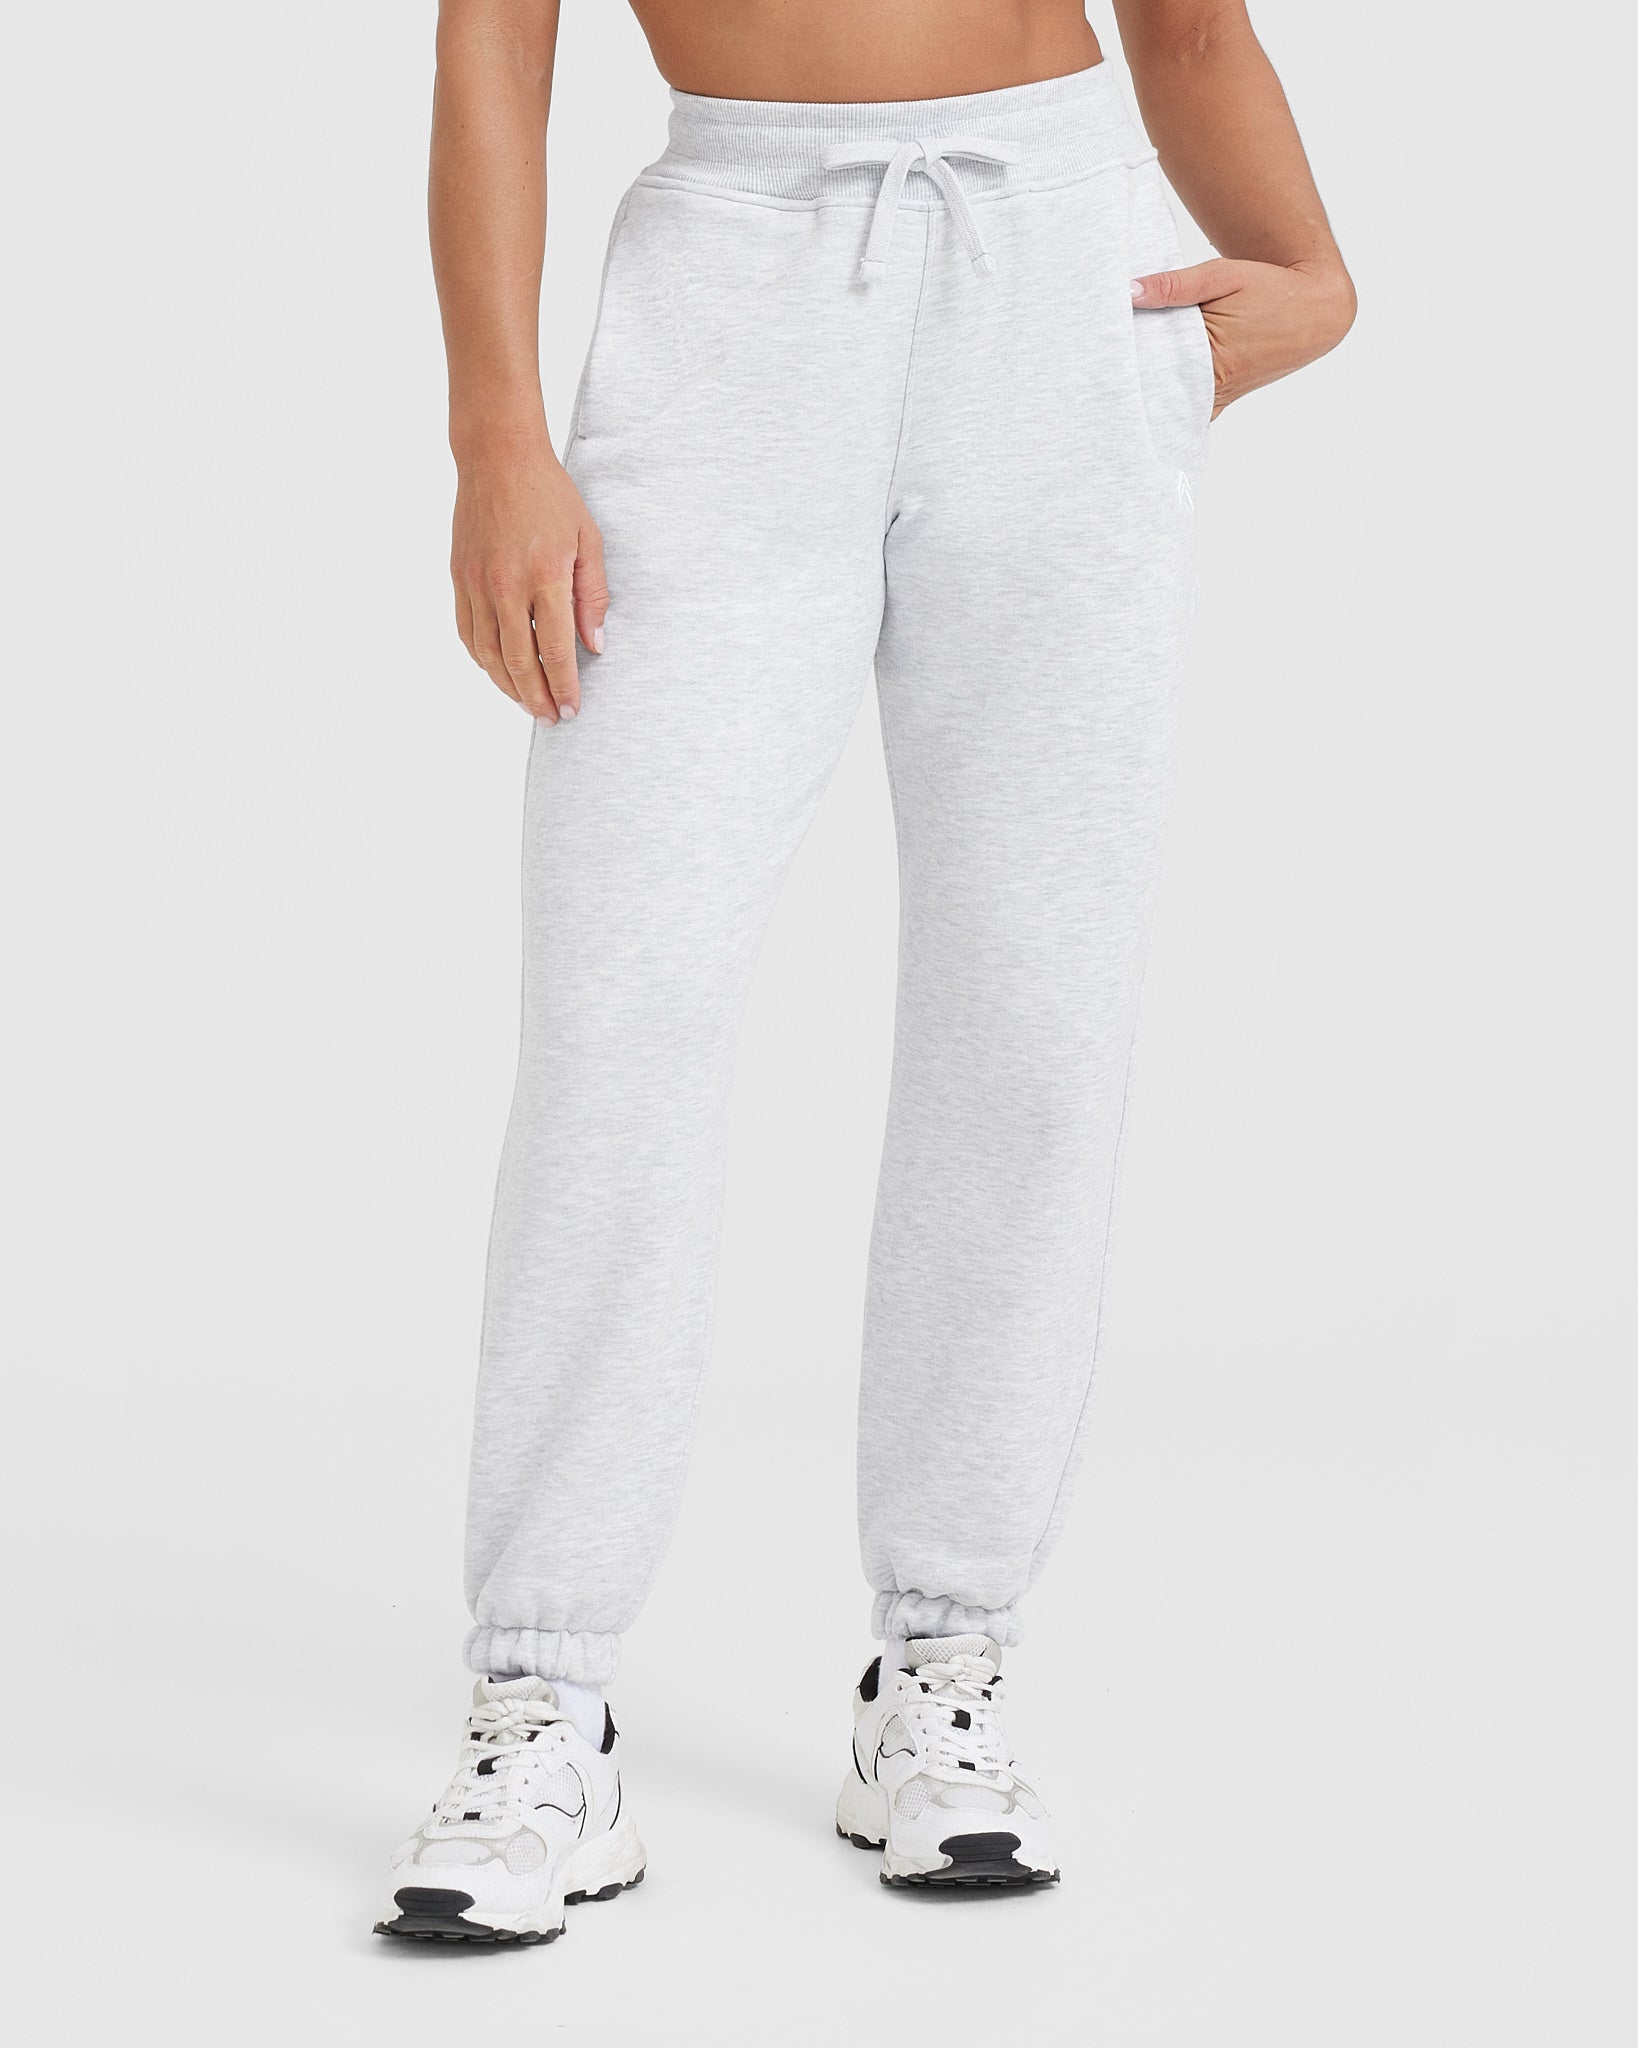 All Day Jogger Light Grey Marl | Oner Active US